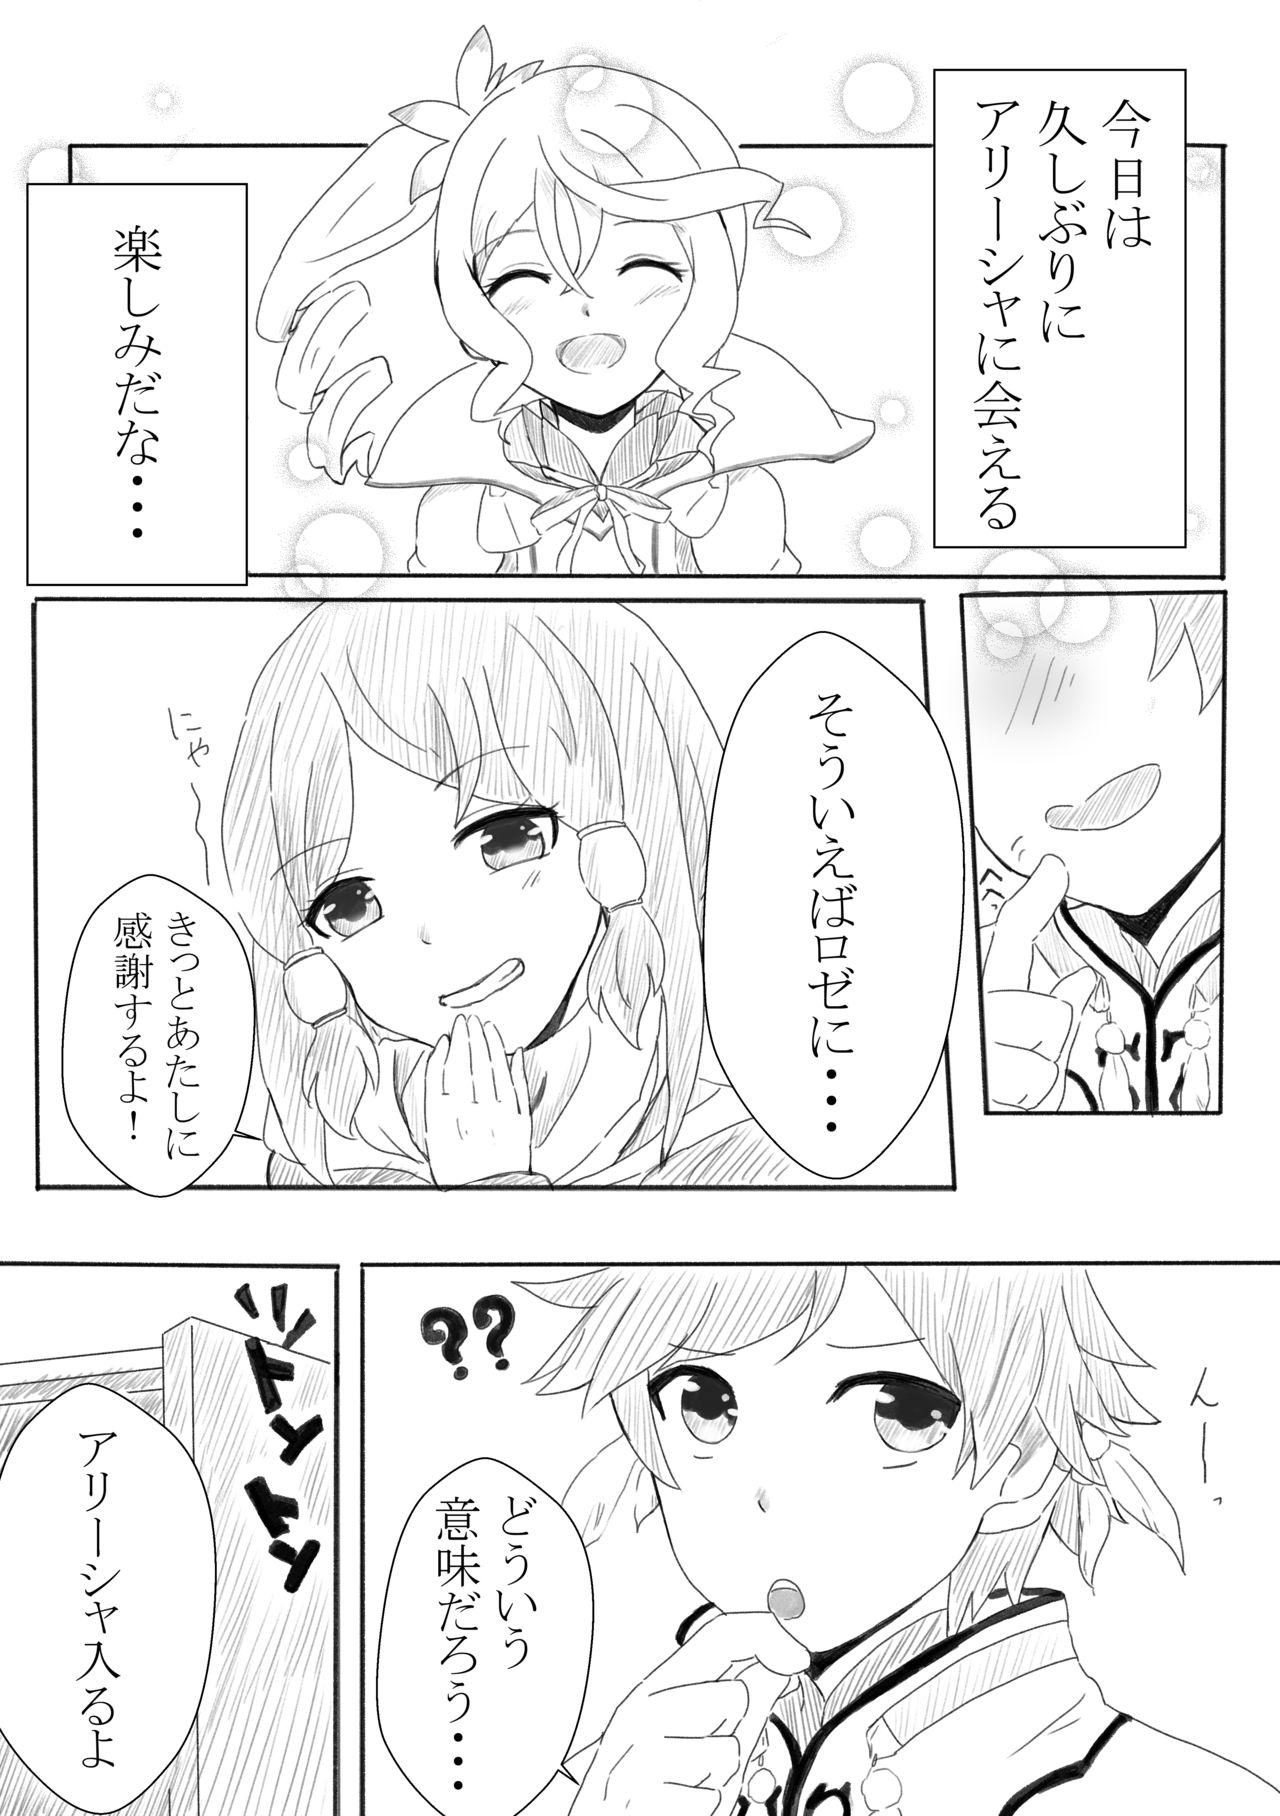 Large アリーシャで癒して？ - Tales of zestiria Butthole - Page 2